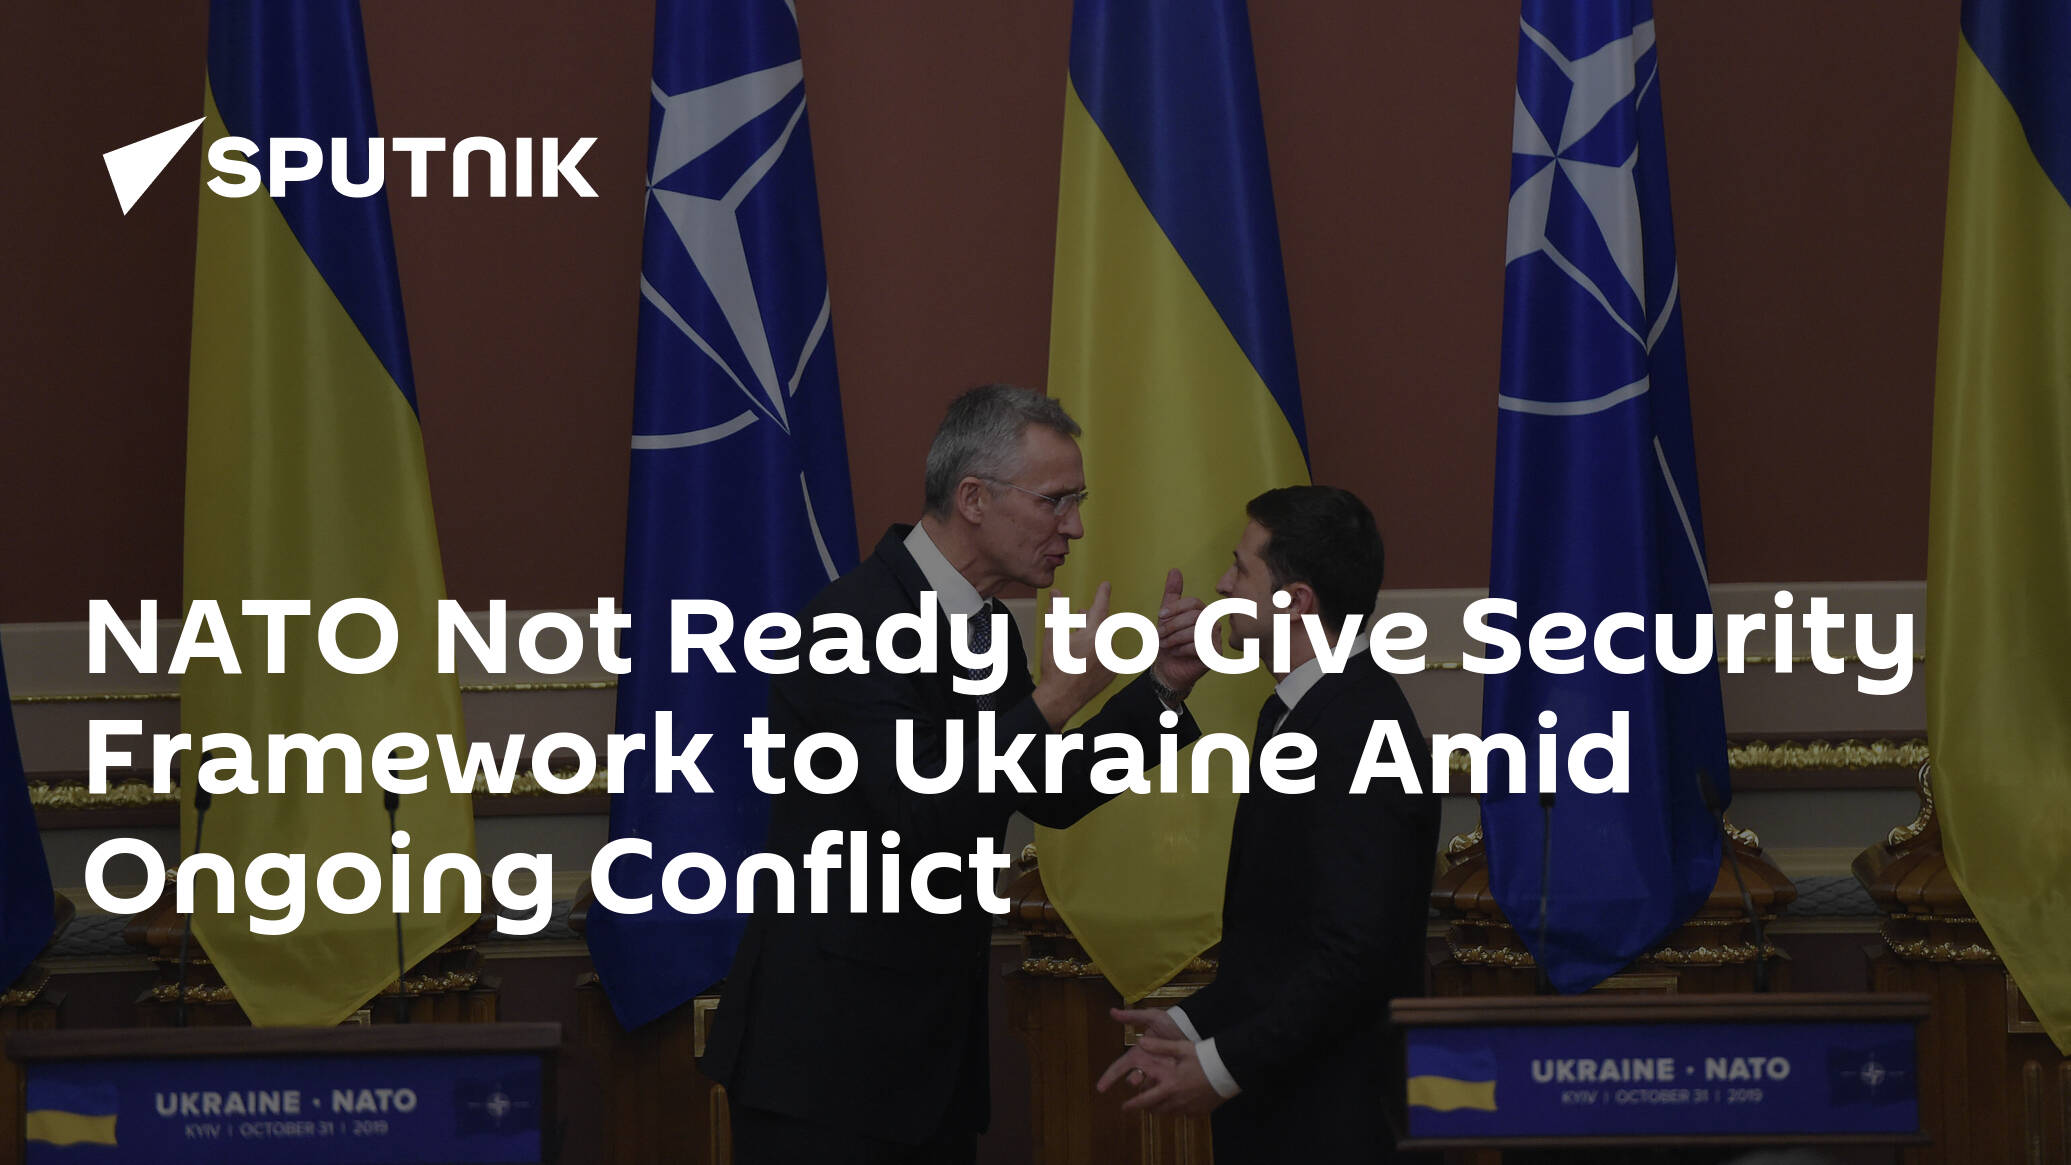 NATO Not Ready to Give Security Framework to Ukraine Amid Ongoing Conflict